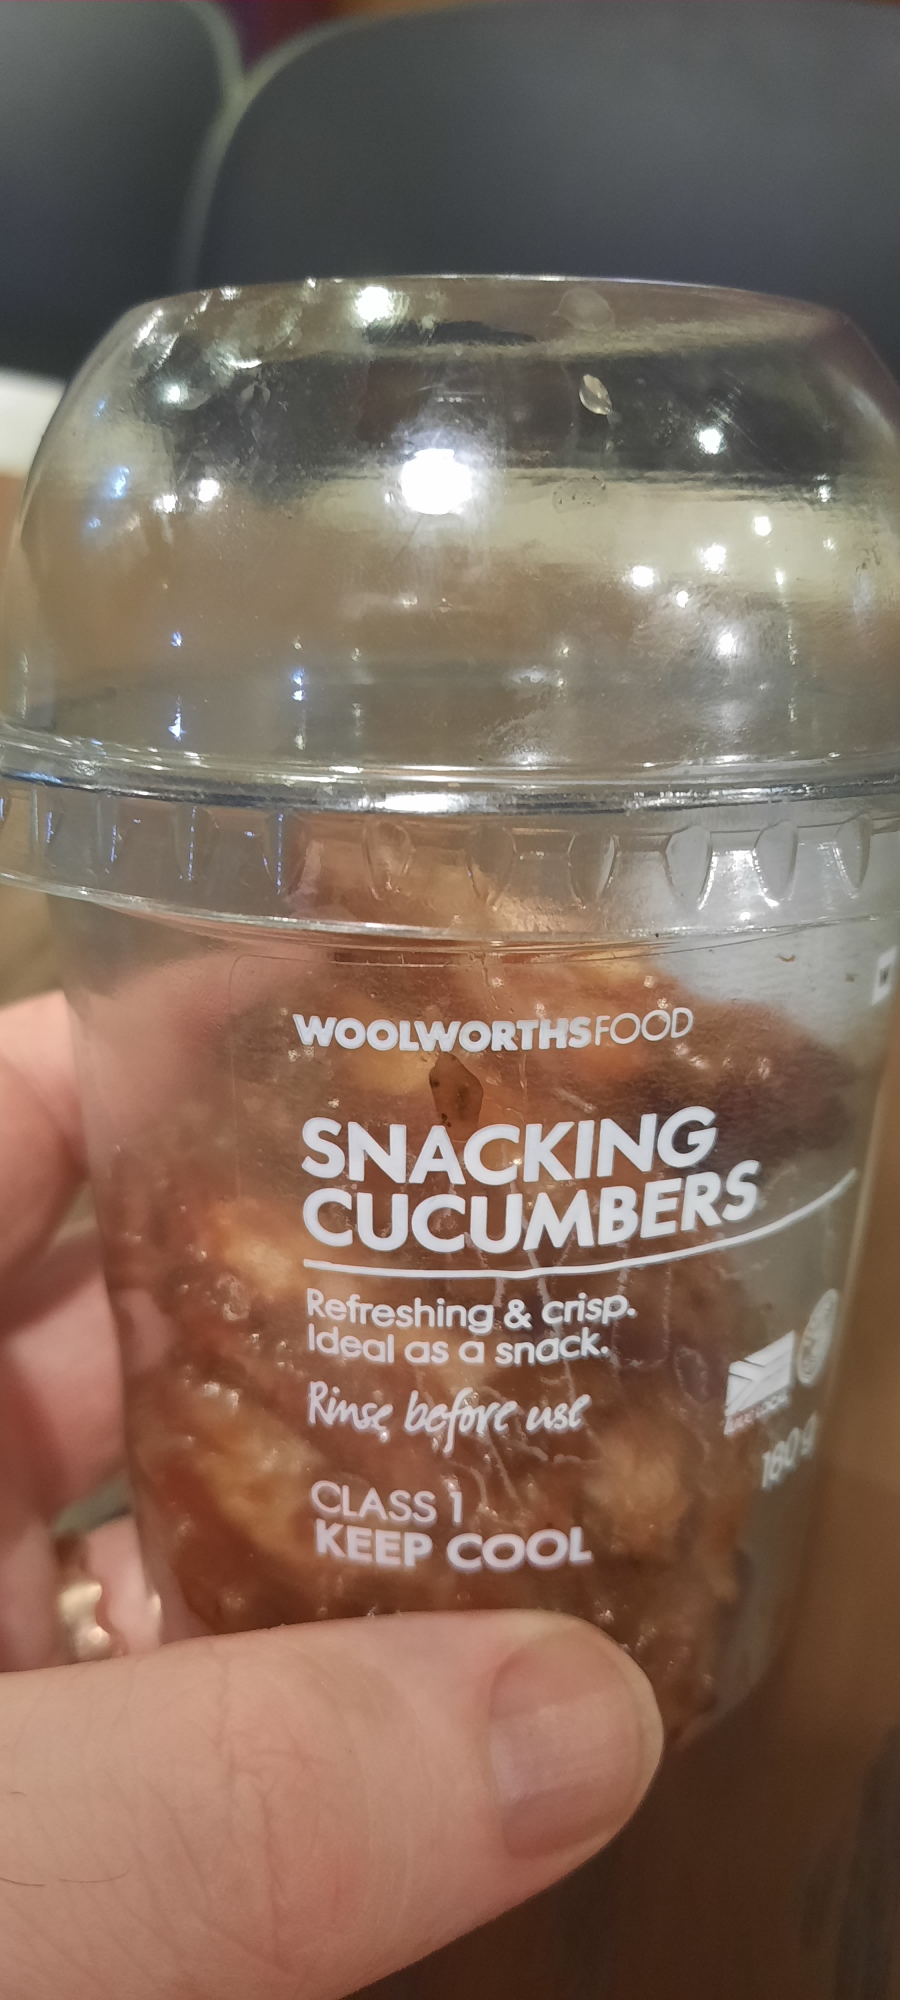 A plastic container with the caption "snacking cucumbers" containing chicken wings